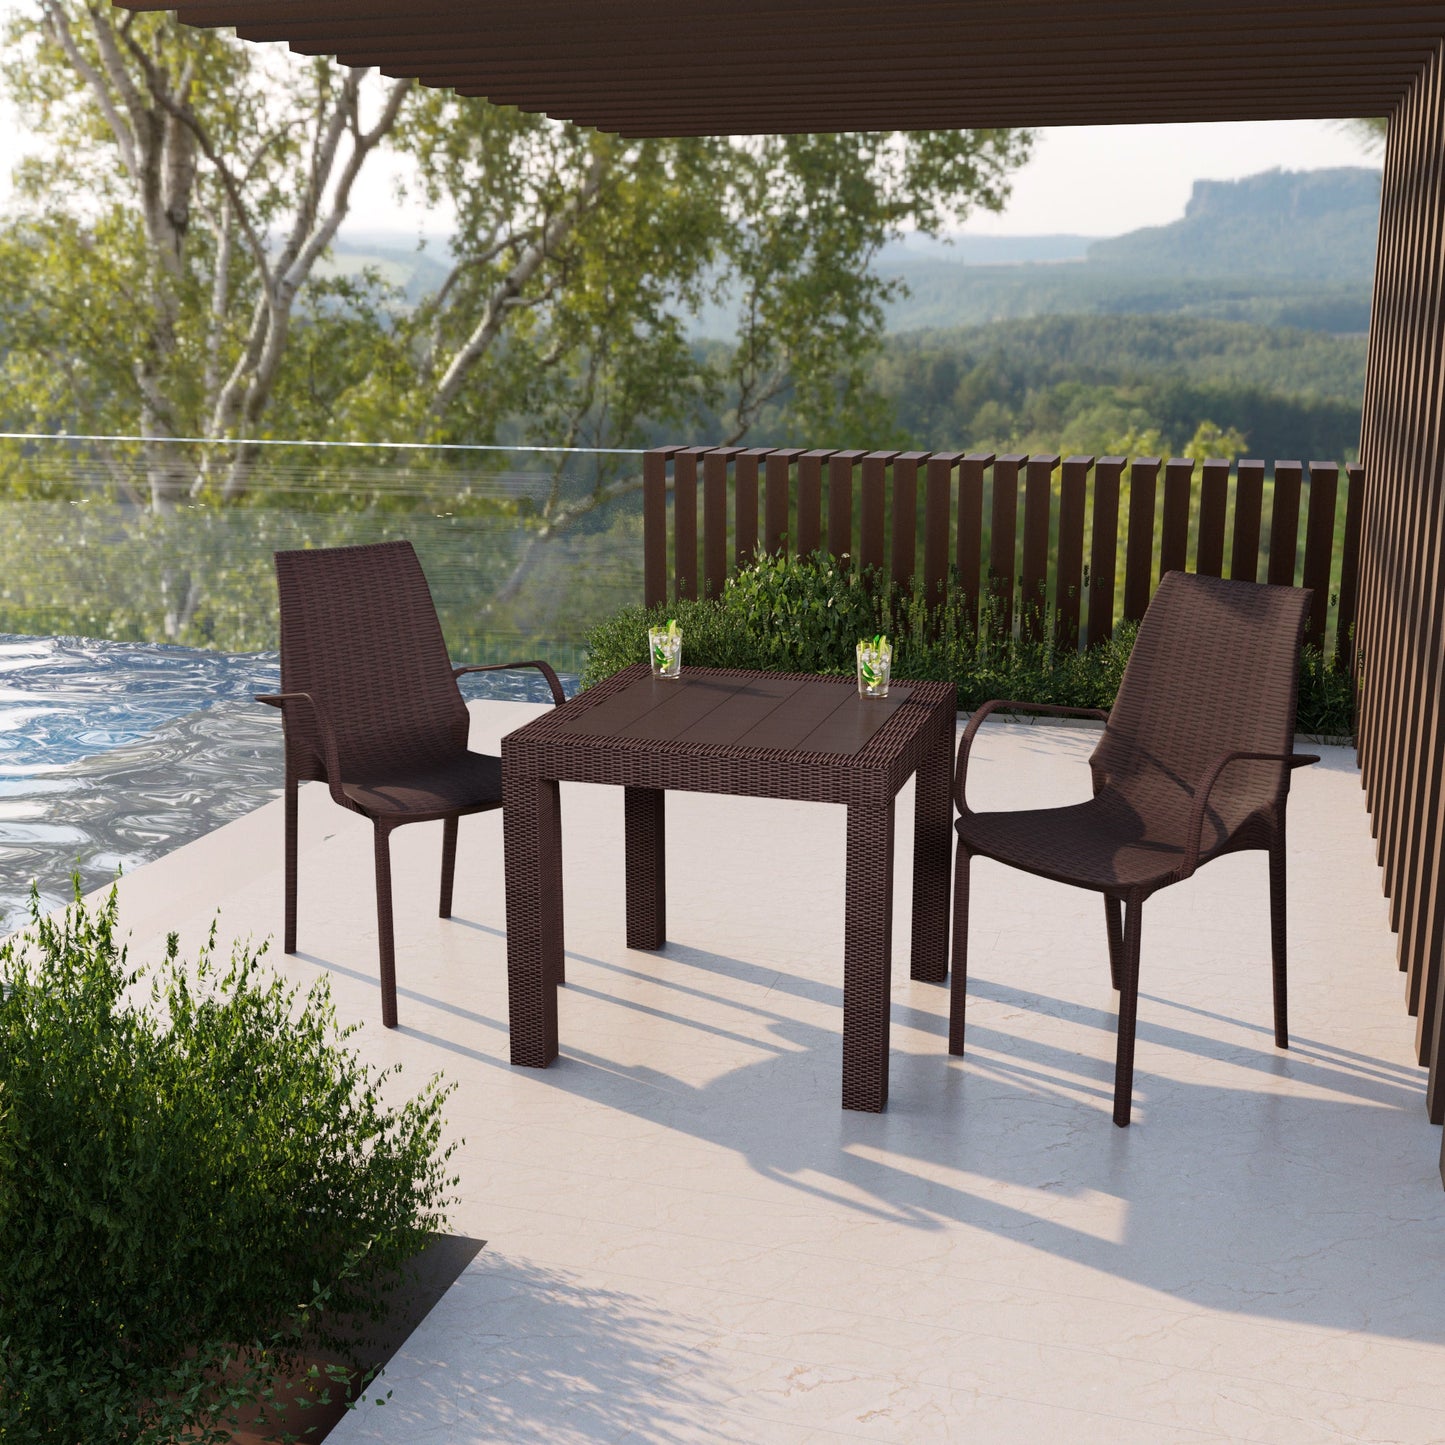 Anders Outdoor Patio Plastic Dining Arm Chair - Set of 2